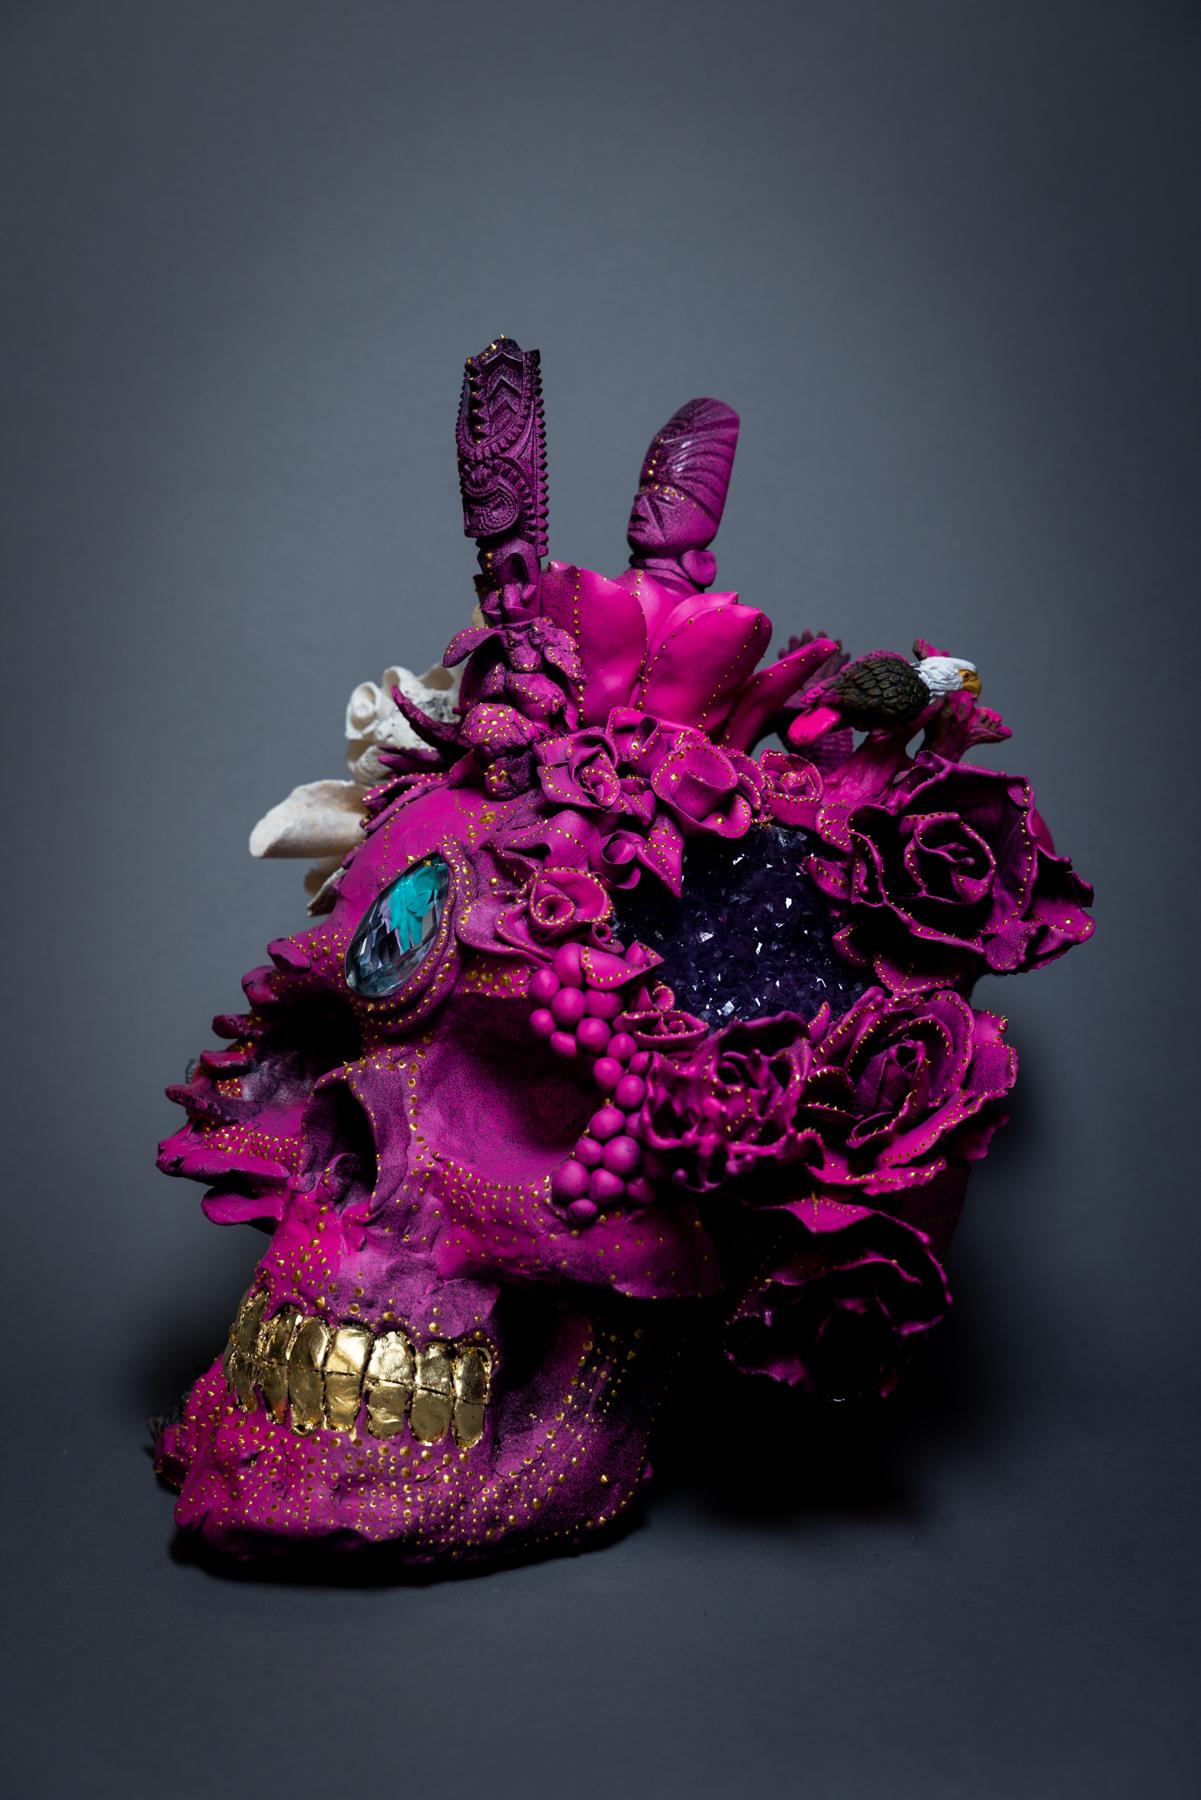 Pinky - Sculpture by Johnathan Ball